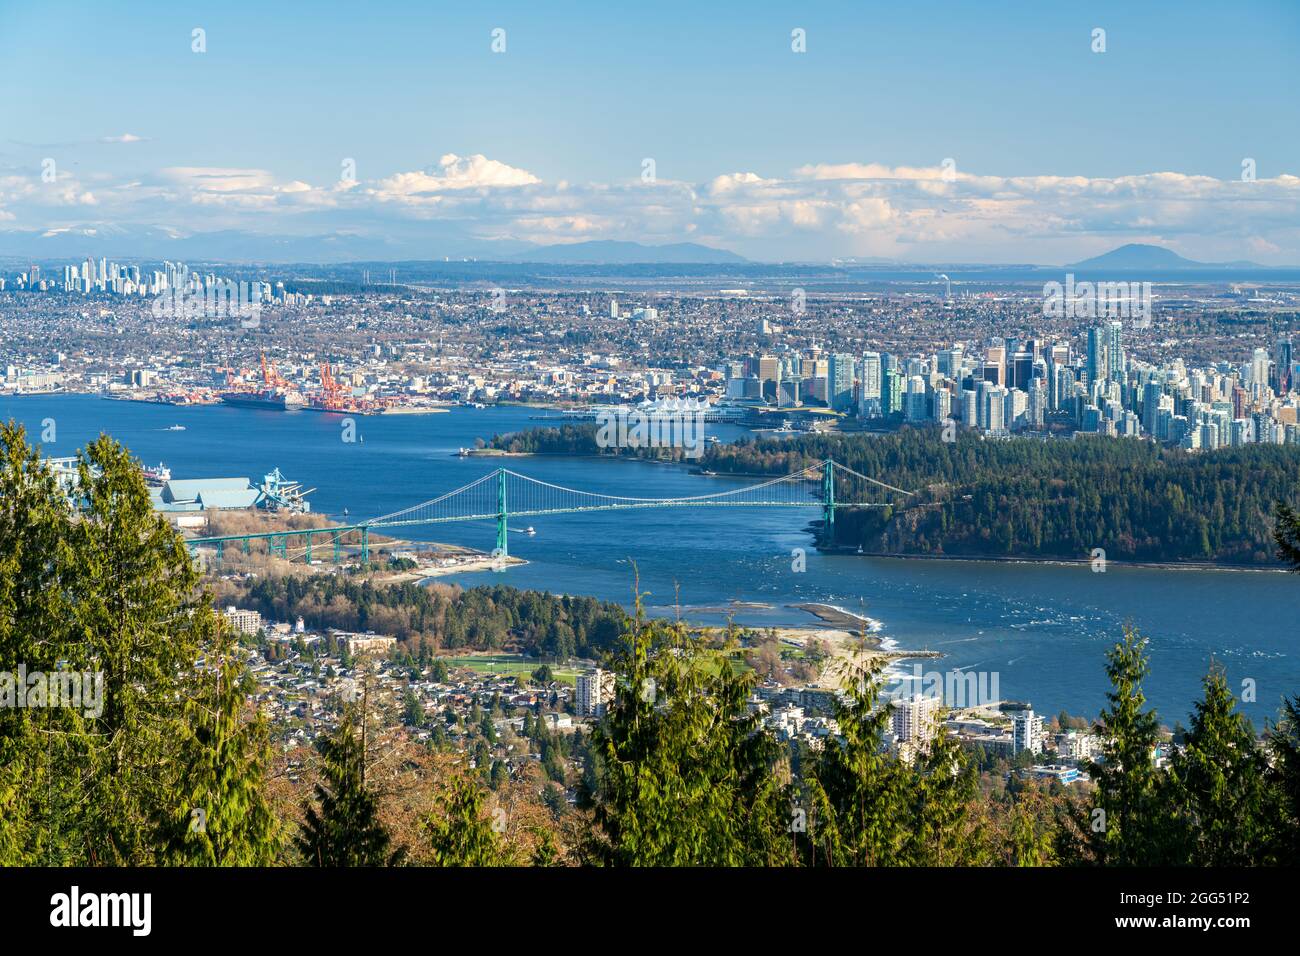 Cypress Mountain Vancouver Outlook. Vancouver city downtown and Harbour panorama view. Lions Gate Bridge, British Columbia, Canada. Stock Photo